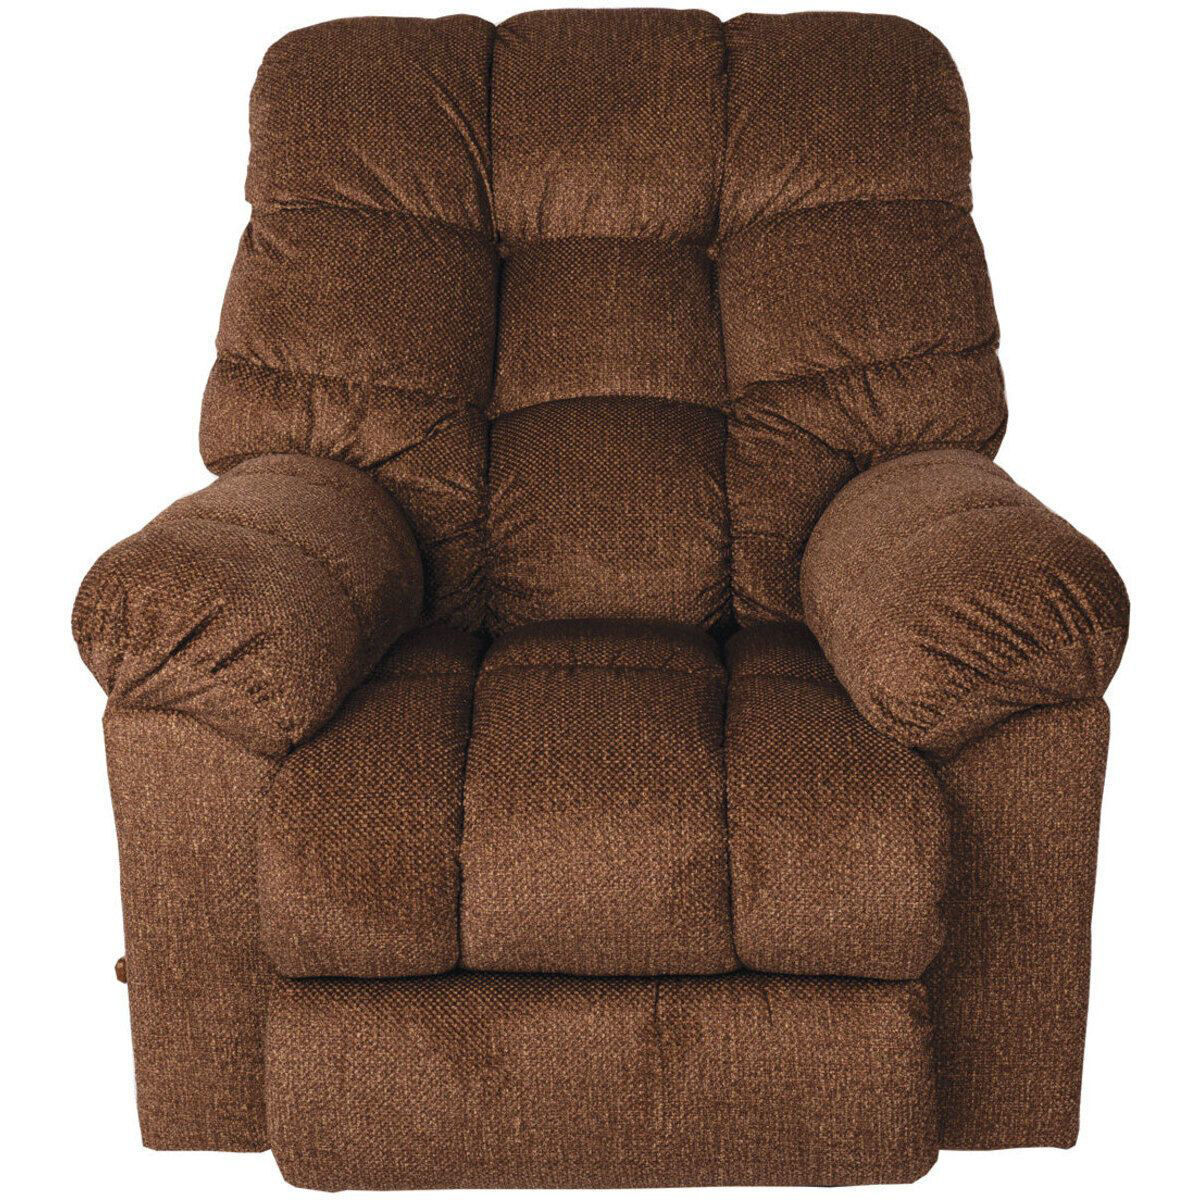 Picture of CANTON ROCKER RECLINER